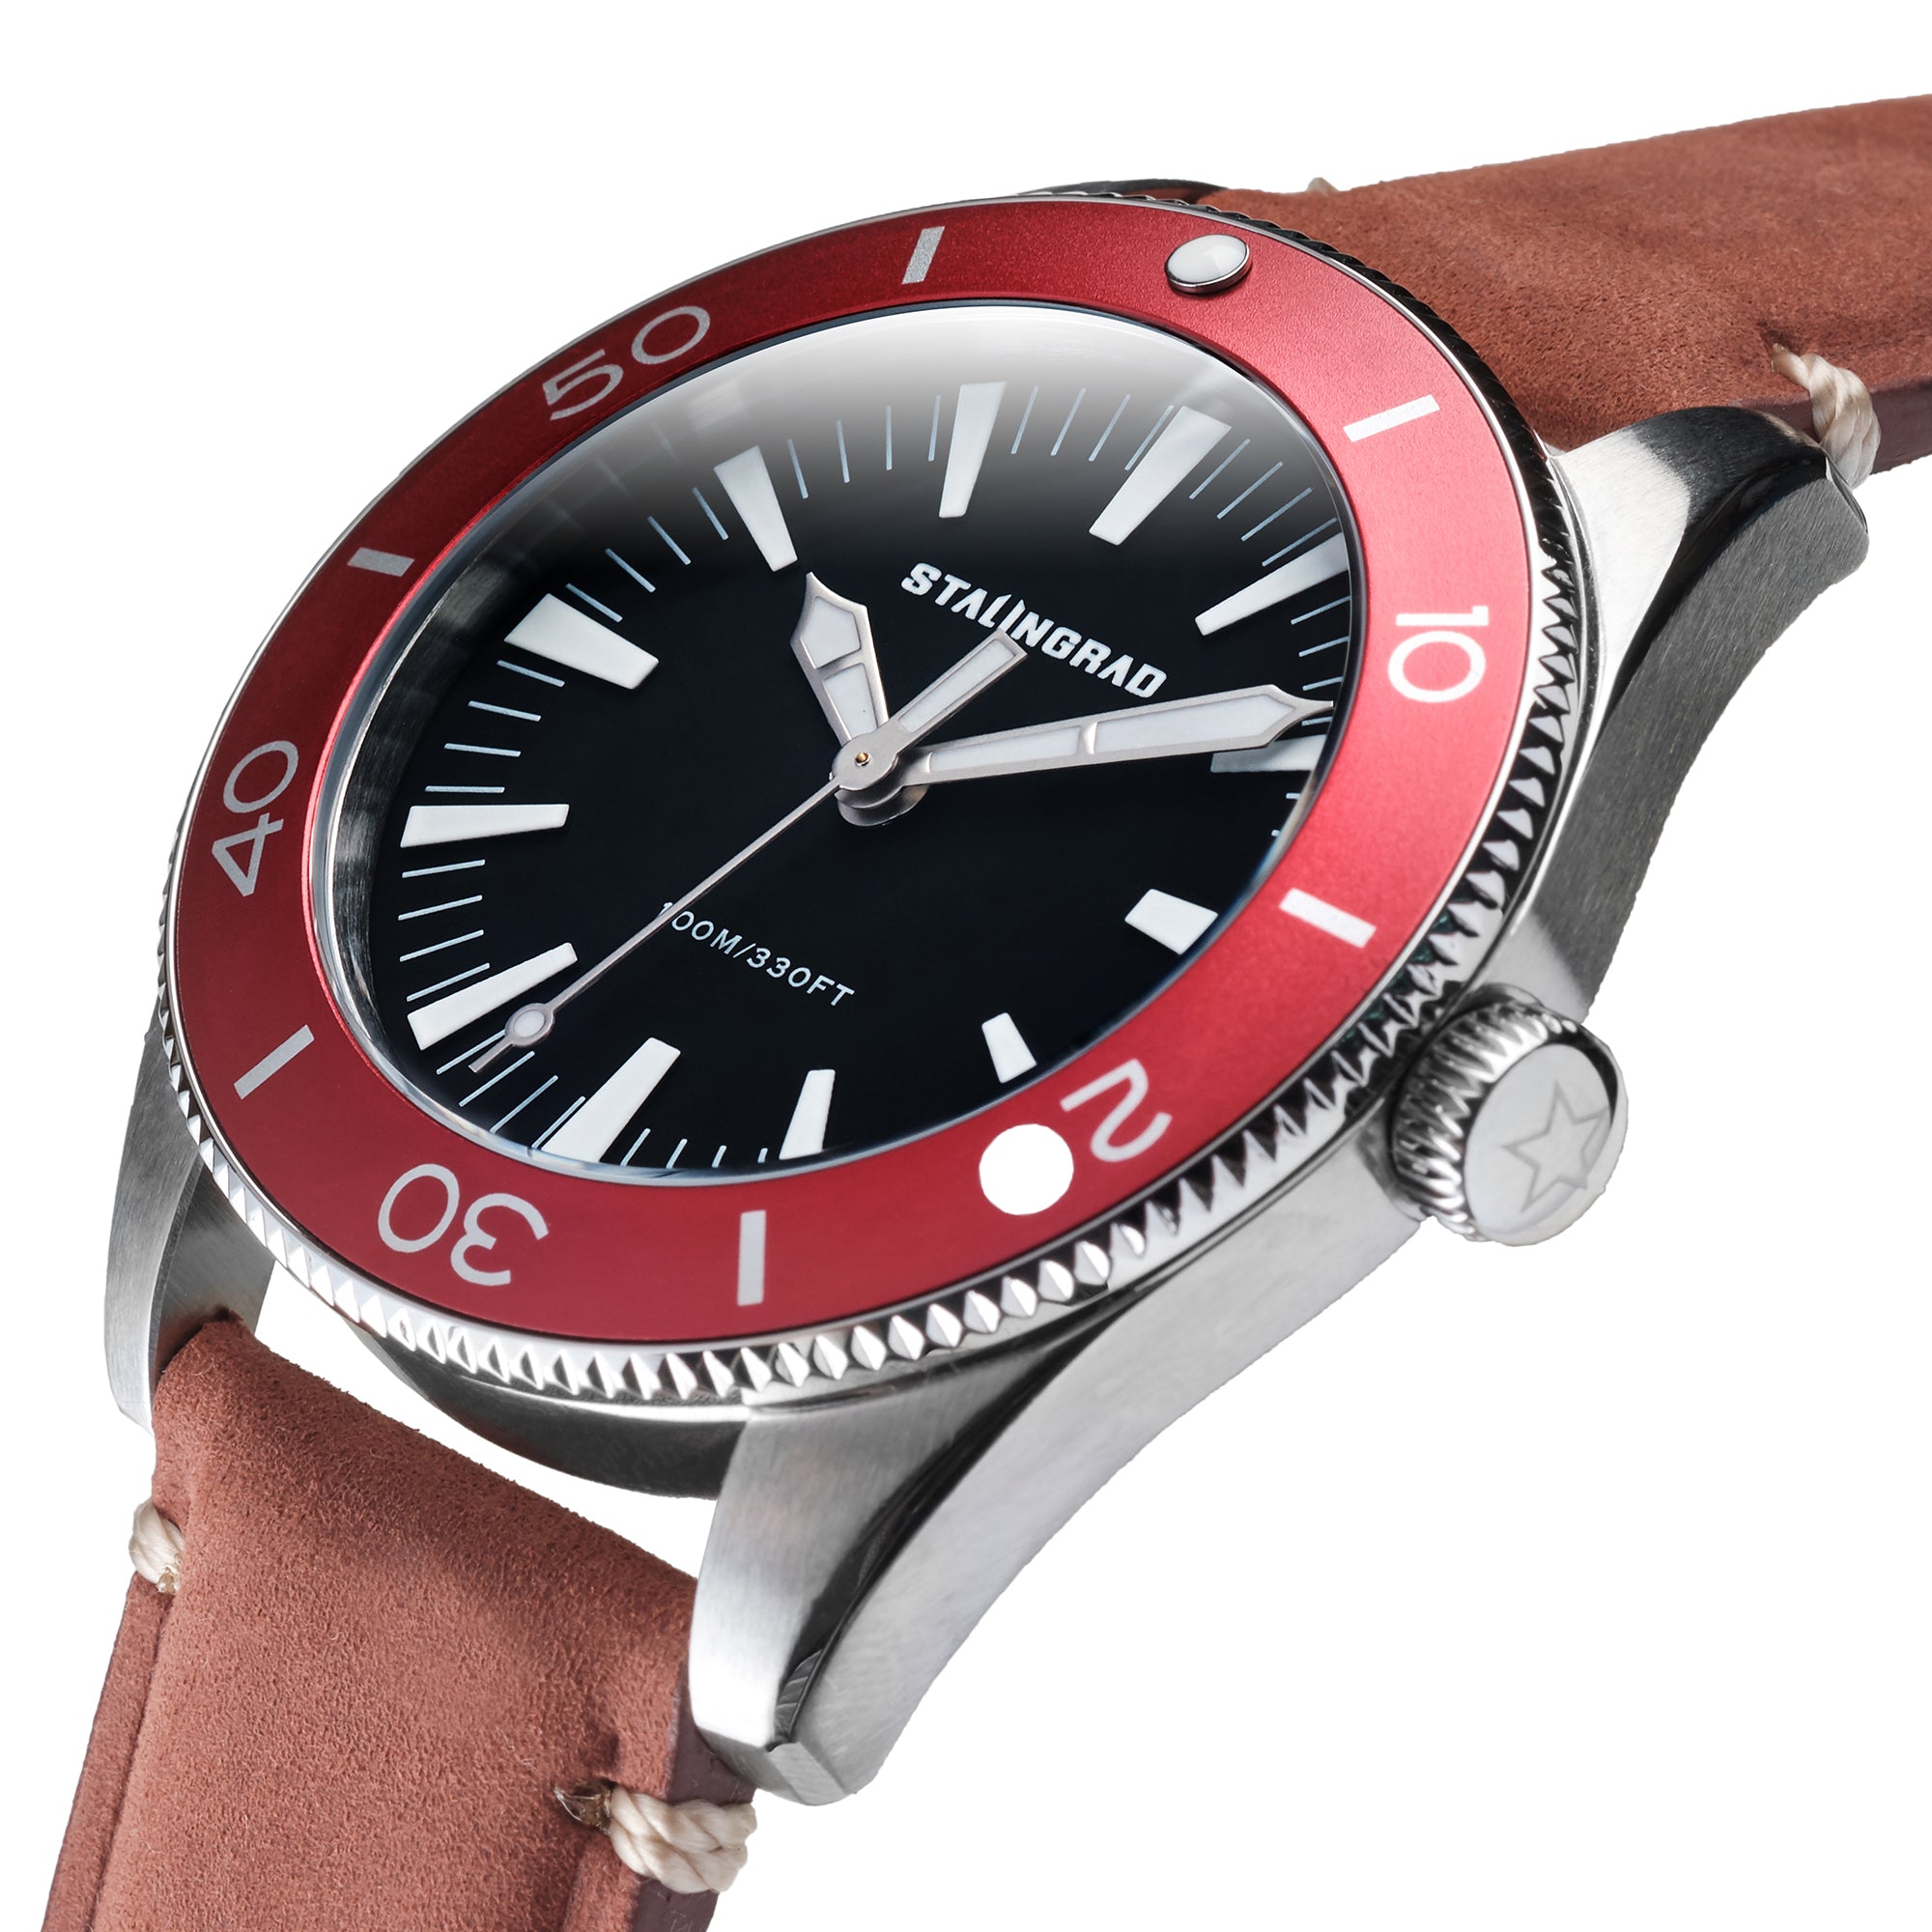 Stalingrad Iron Will Watch Black Dial with a Red Bezel and a red leather strap on a white background, diagonal view